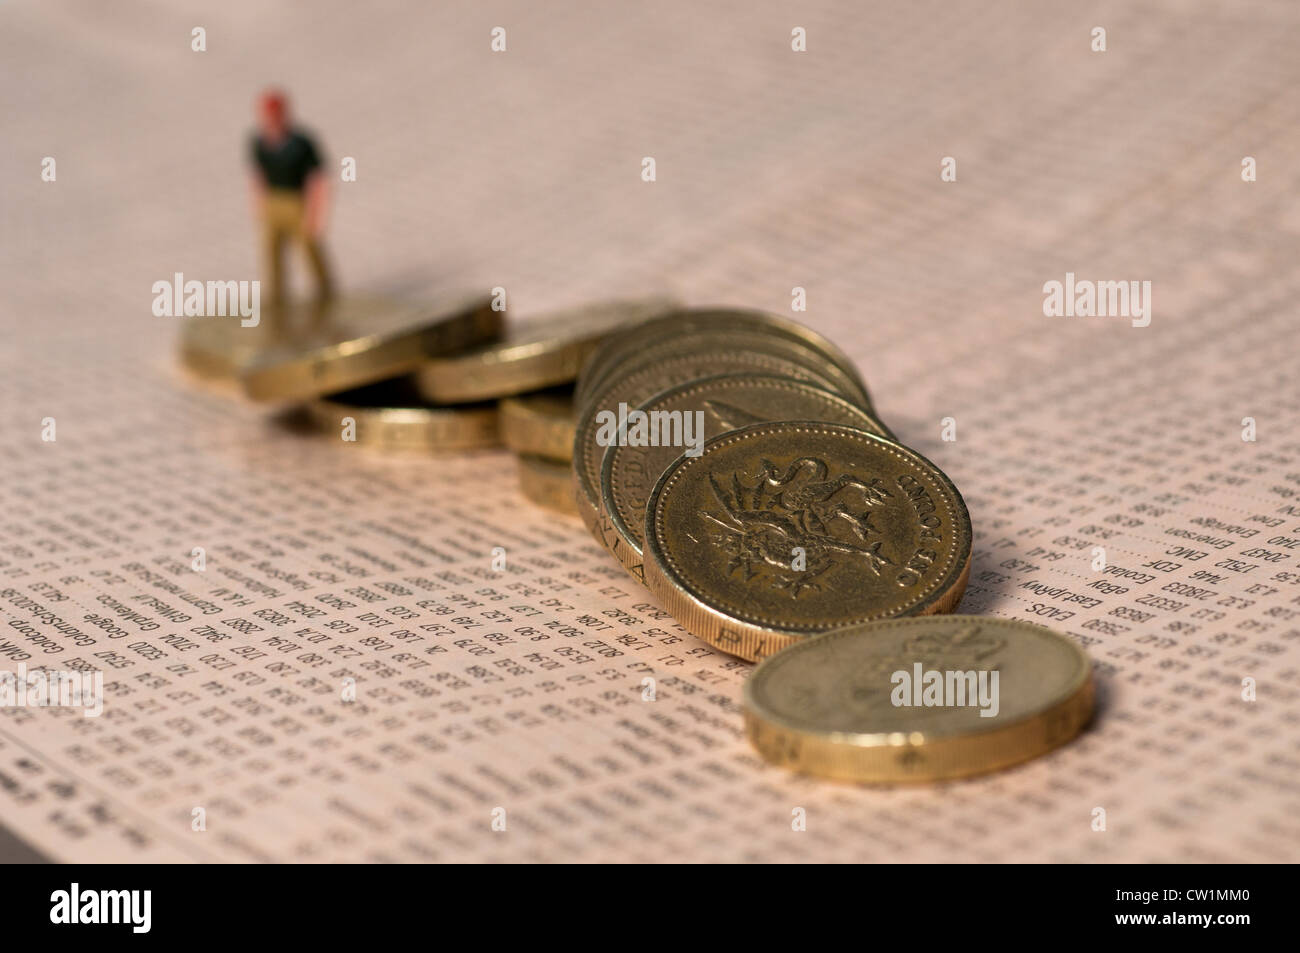 Little figure of a man climbing over tumbled one pound coins laid over share figures, Stock Photo